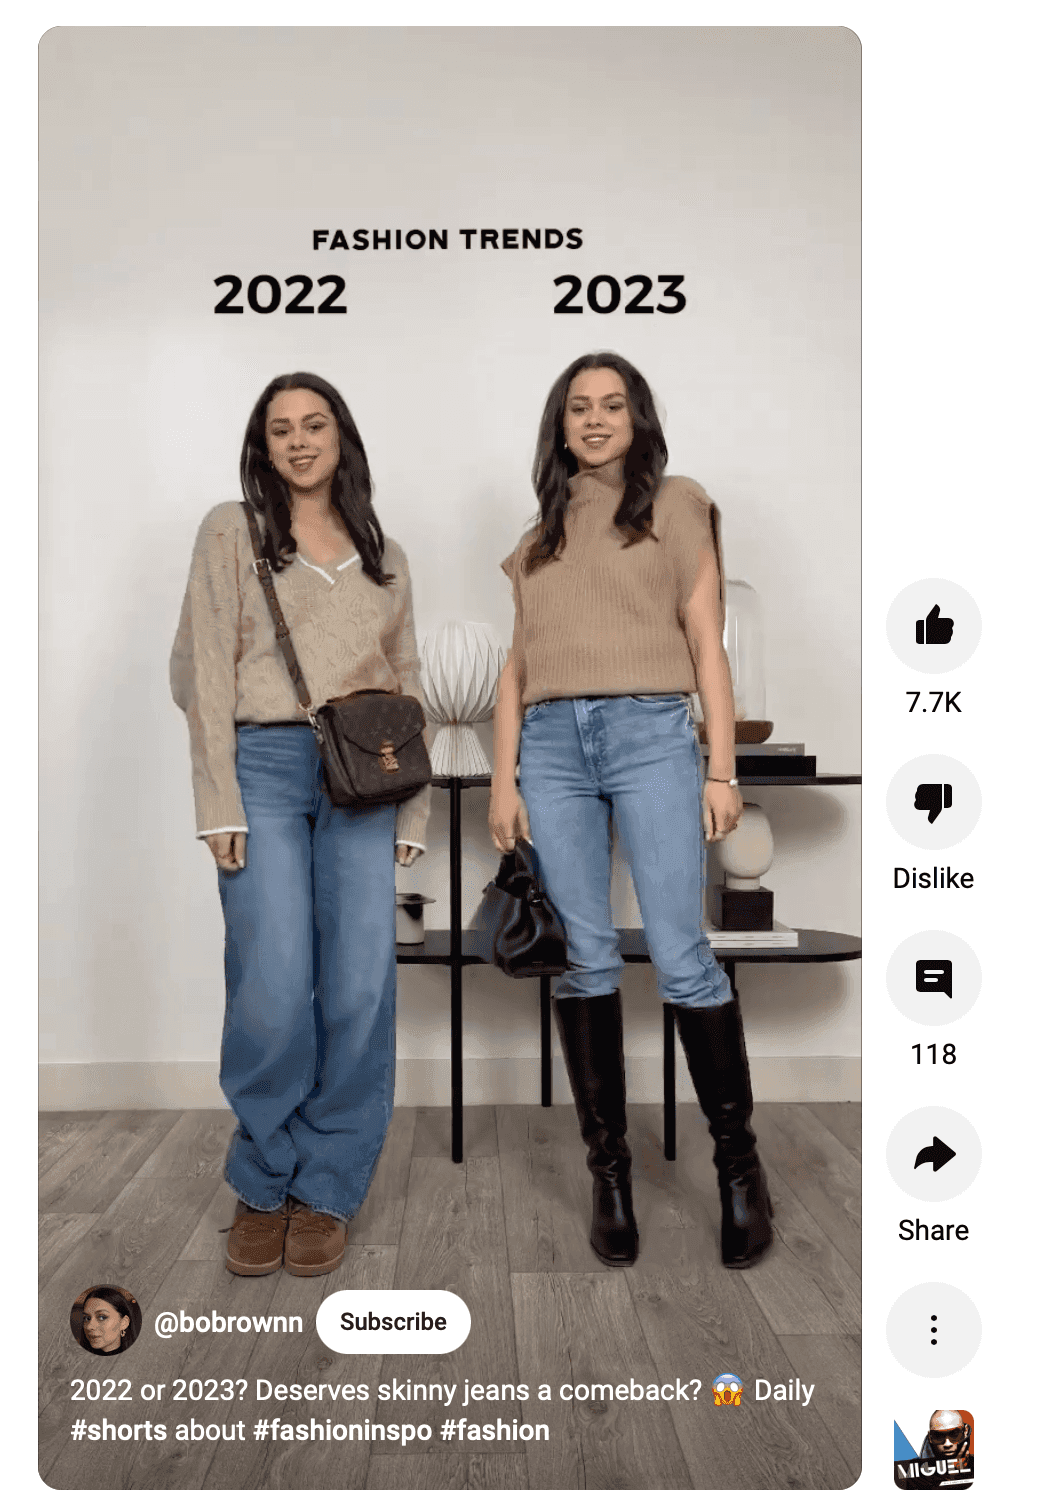 Two women standing wearing different fashion trends